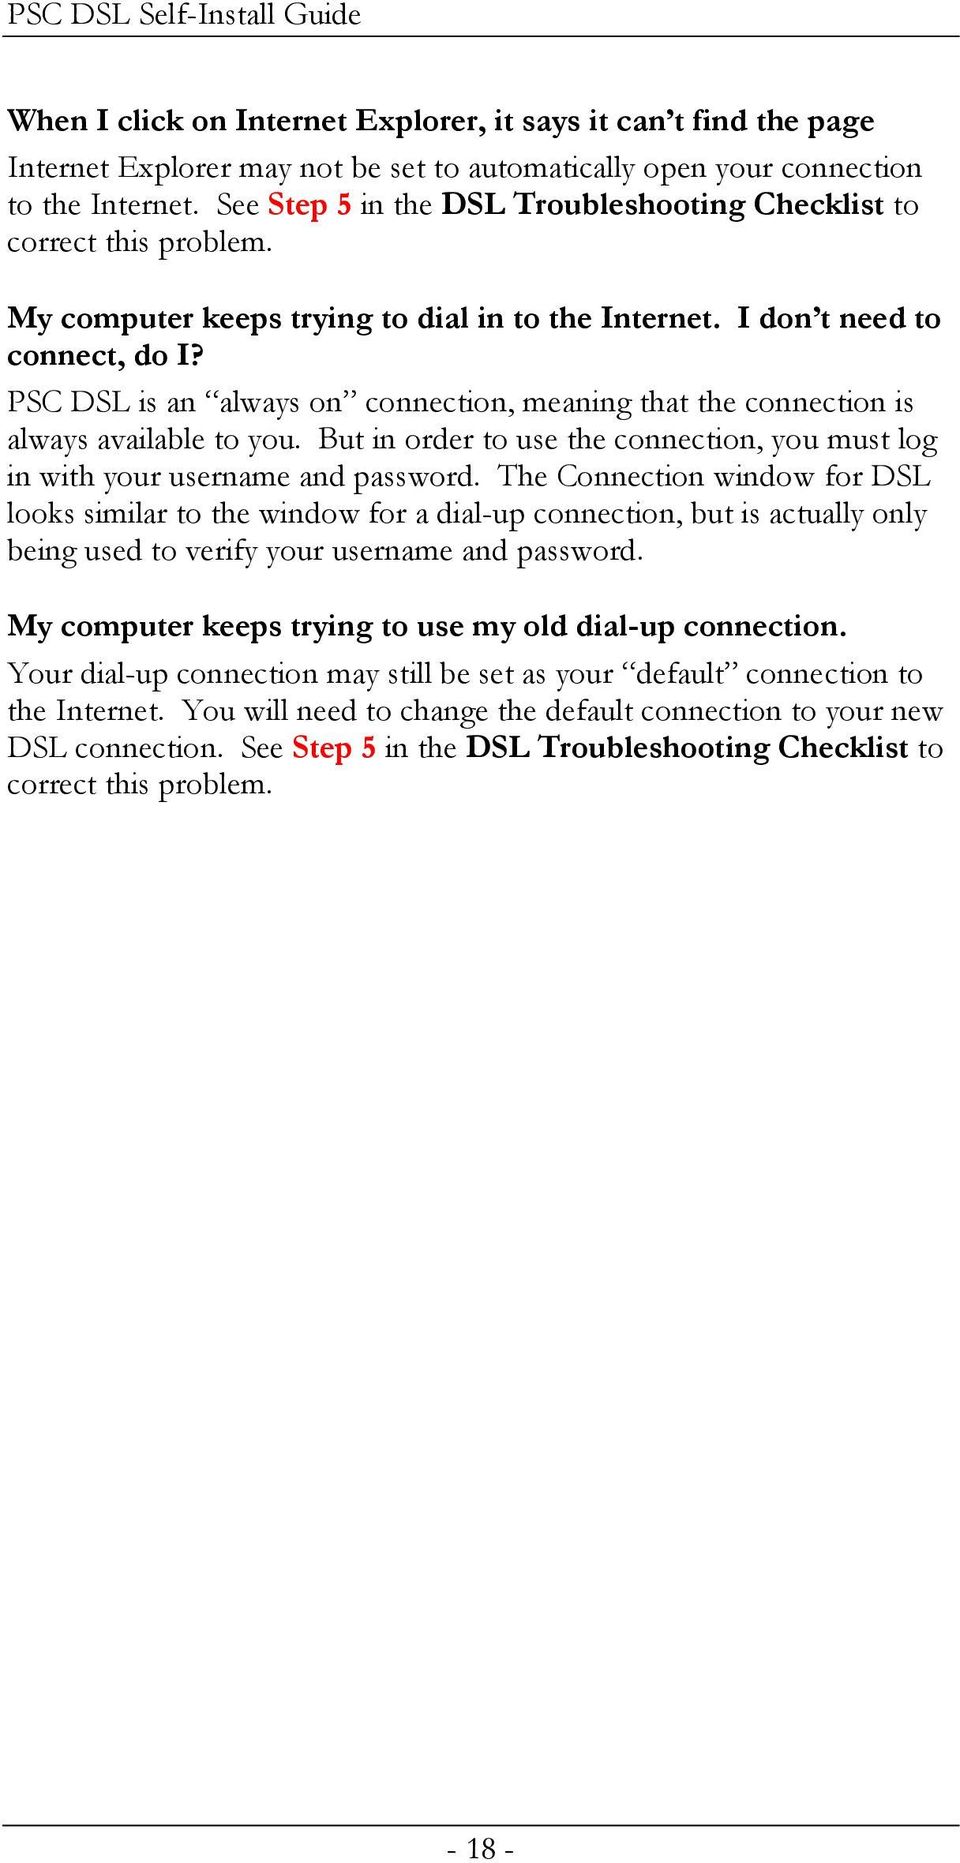 PSC DSL is an always on connection, meaning that the connection is always available to you. But in order to use the connection, you must log in with your username and password.